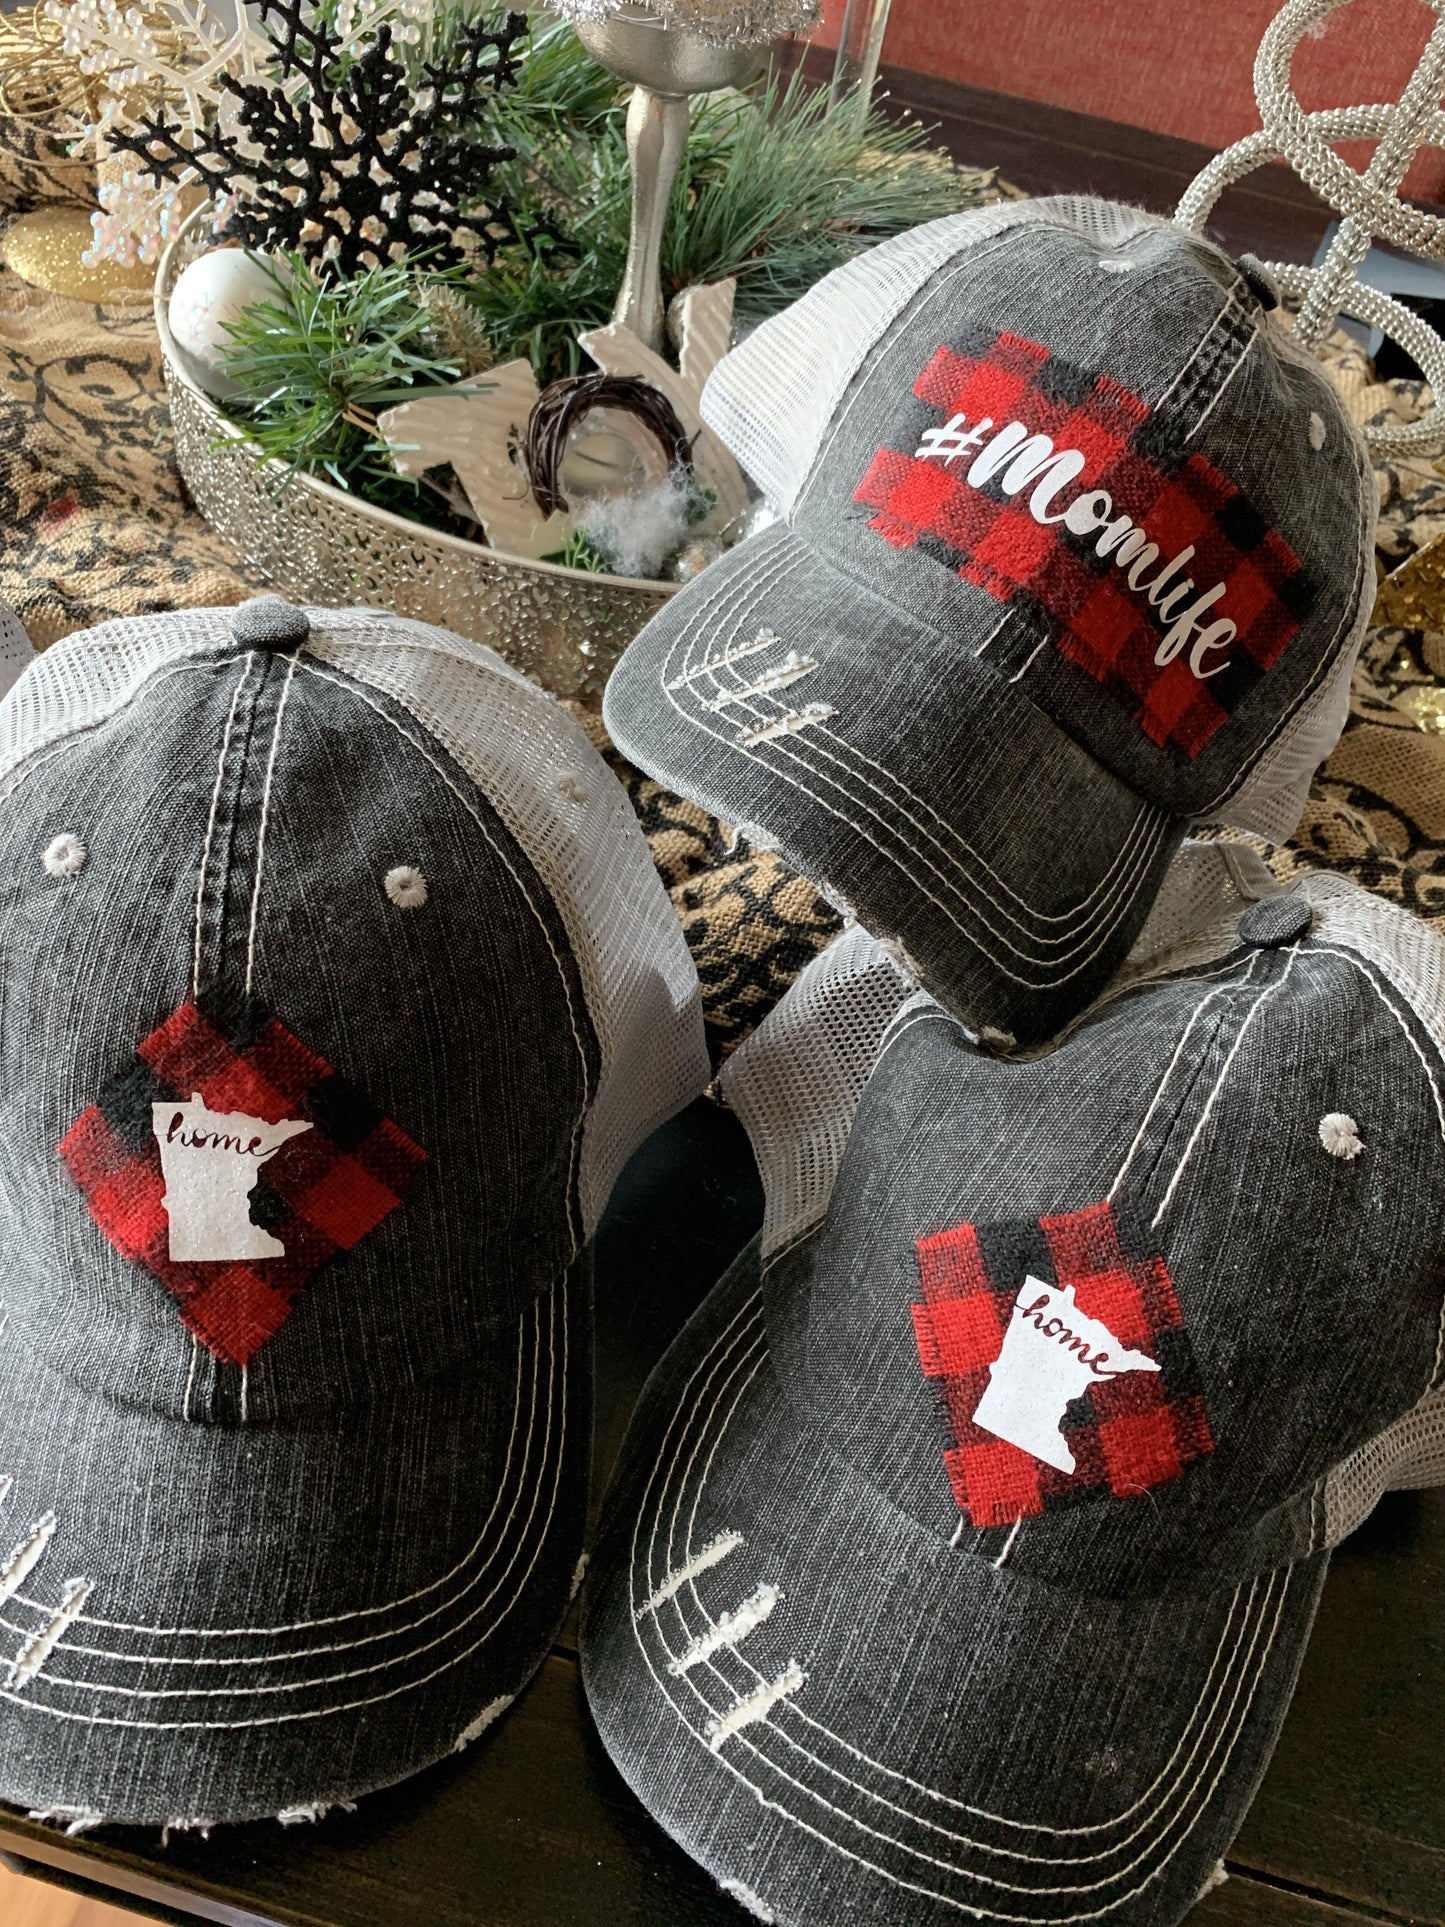 Hats { Minnesota } #momlife. Mn home. - Stacy's Pink Martini Boutique